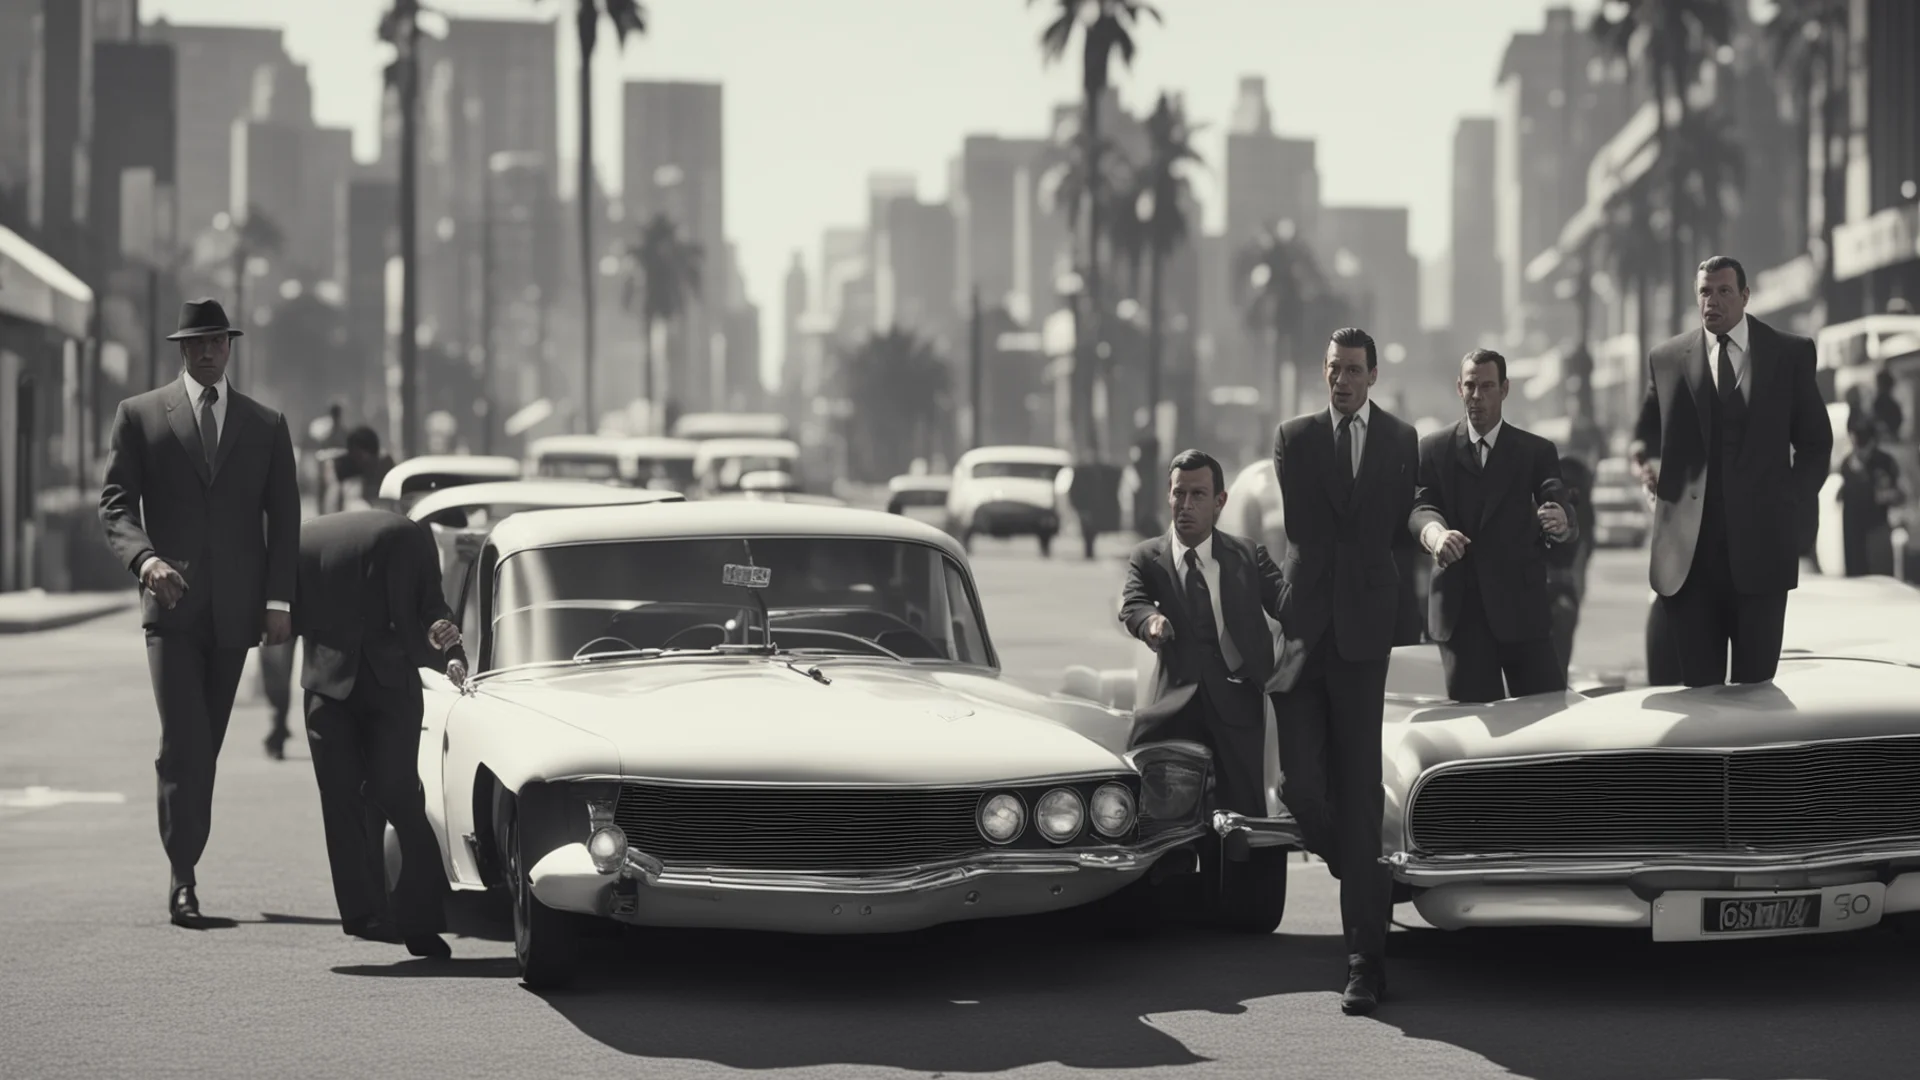 gangster movie scene out of the 60ies in the style of gta 5 amazing awesome portrait 2 wide